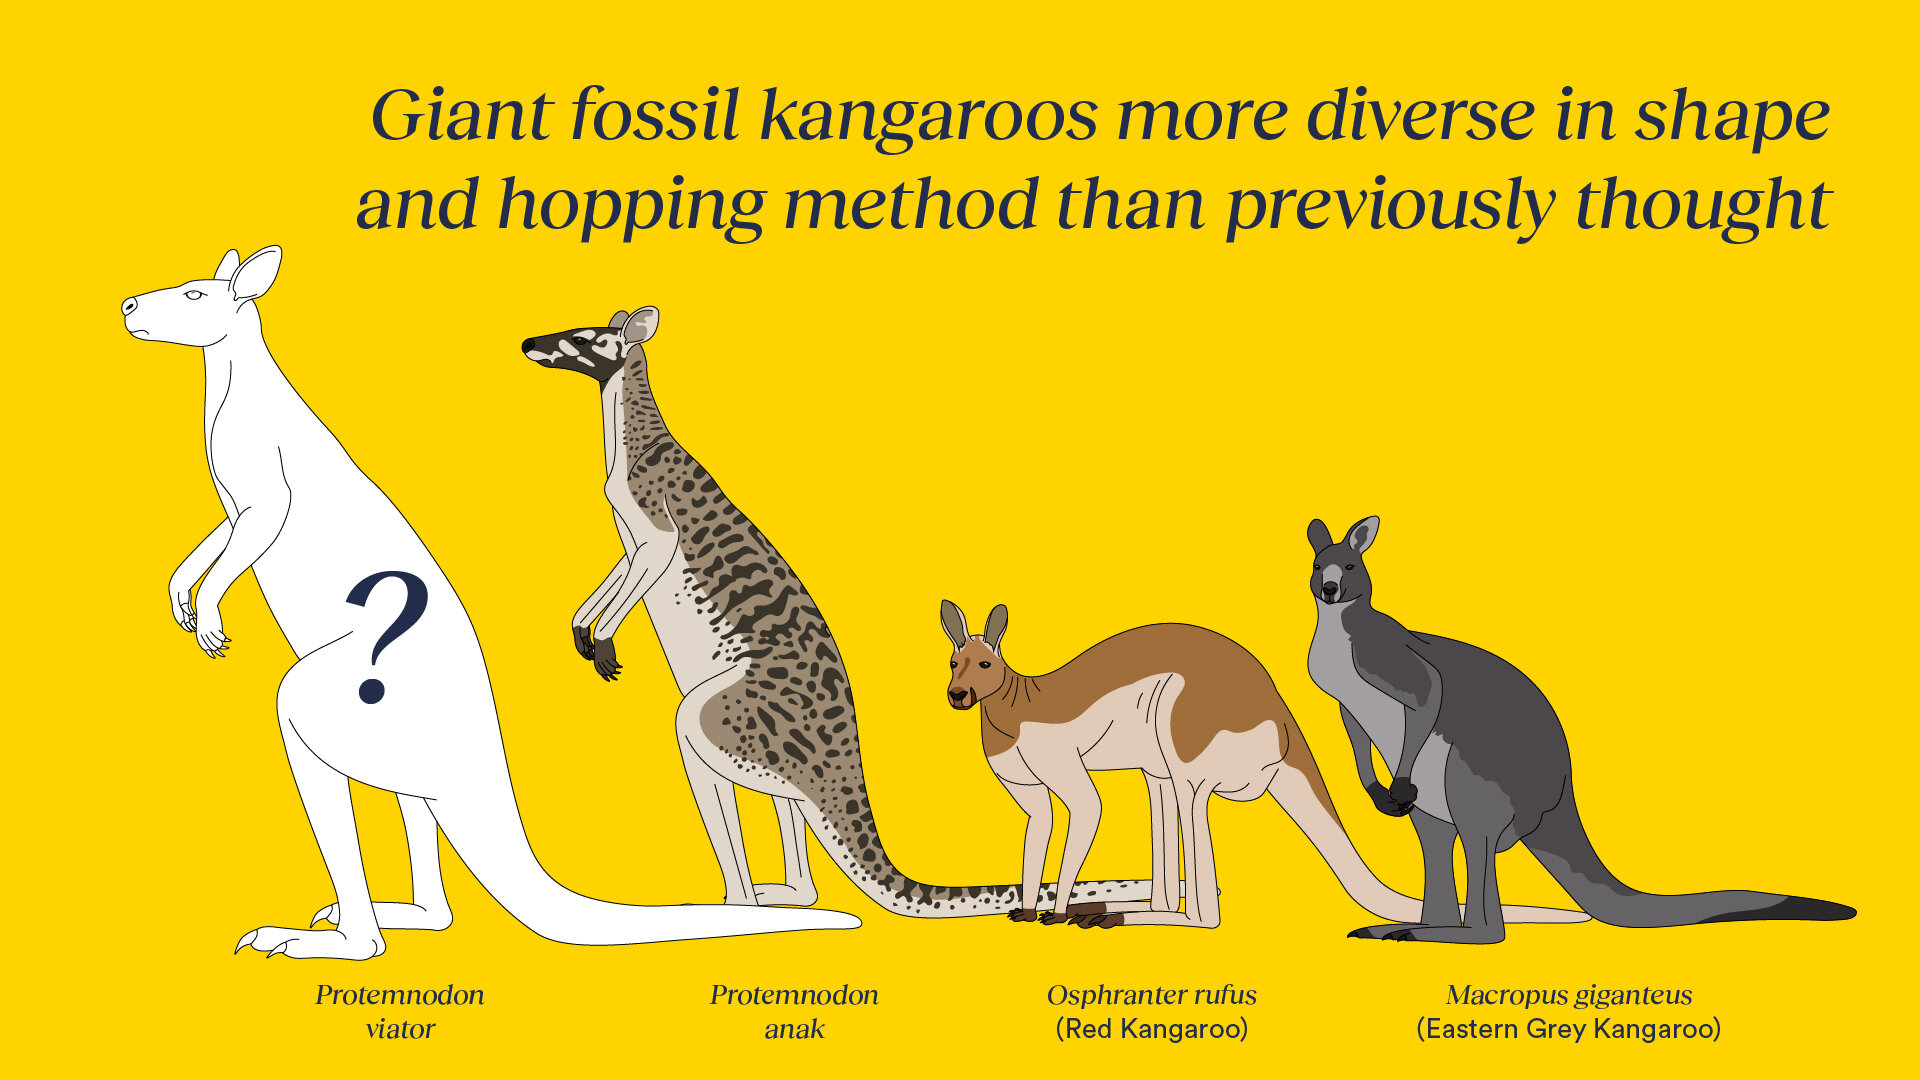 #Digging up new species of Australia and New Guinea’s giant fossil kangaroos